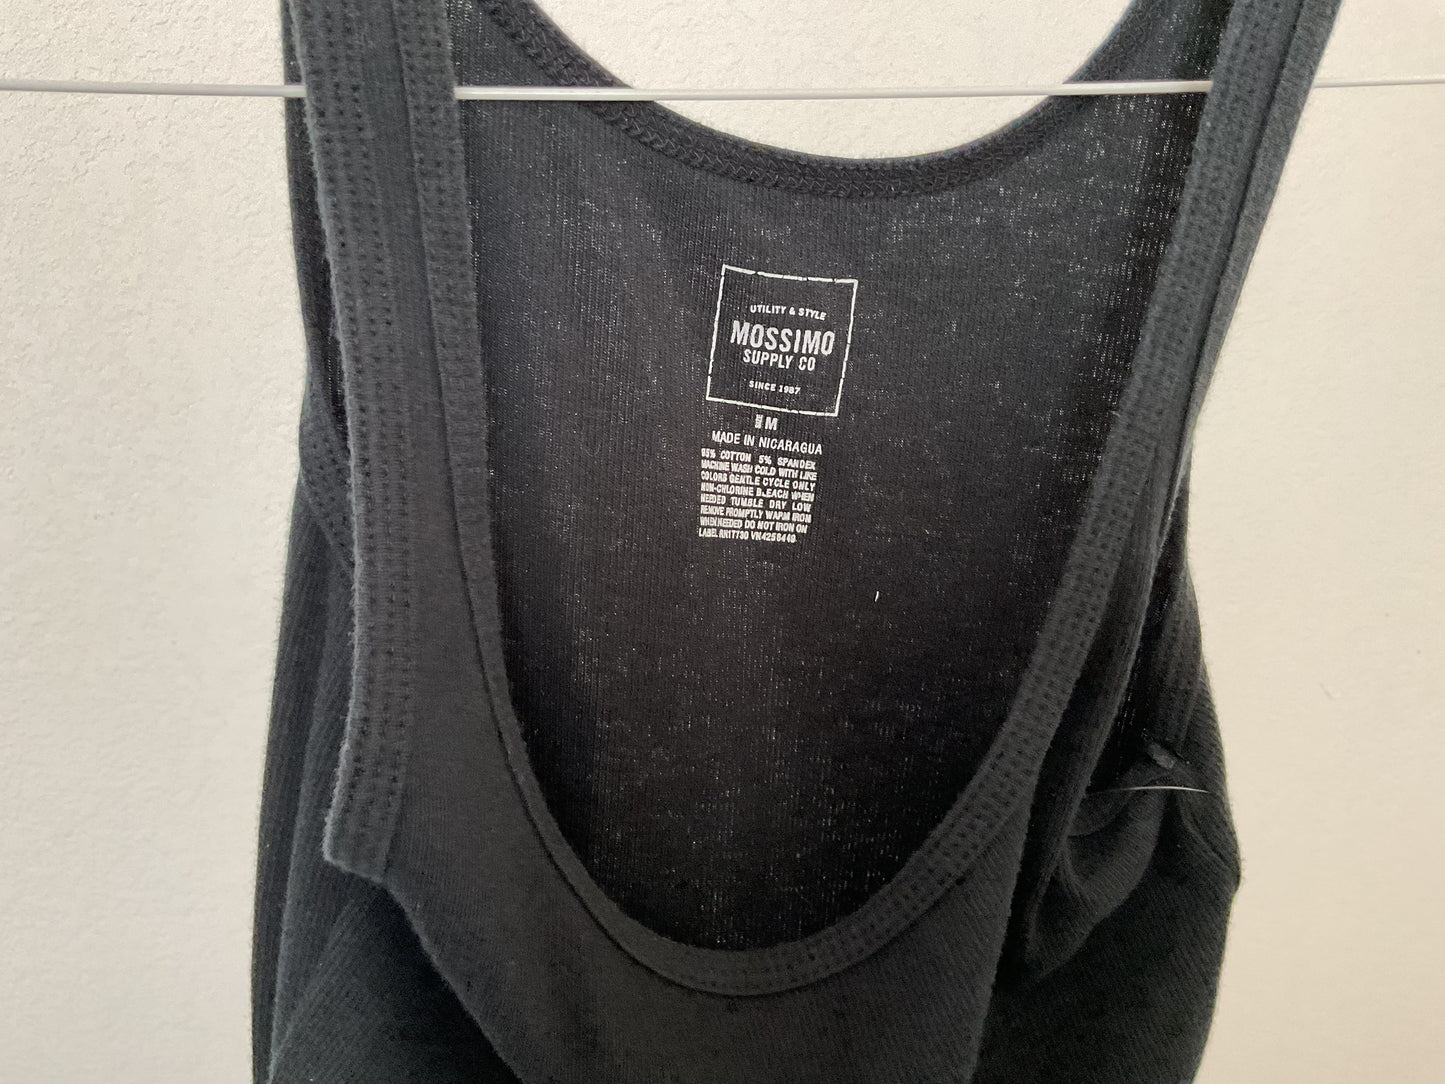 Mossimo Supply Co. Women’s Tank Top Size M.